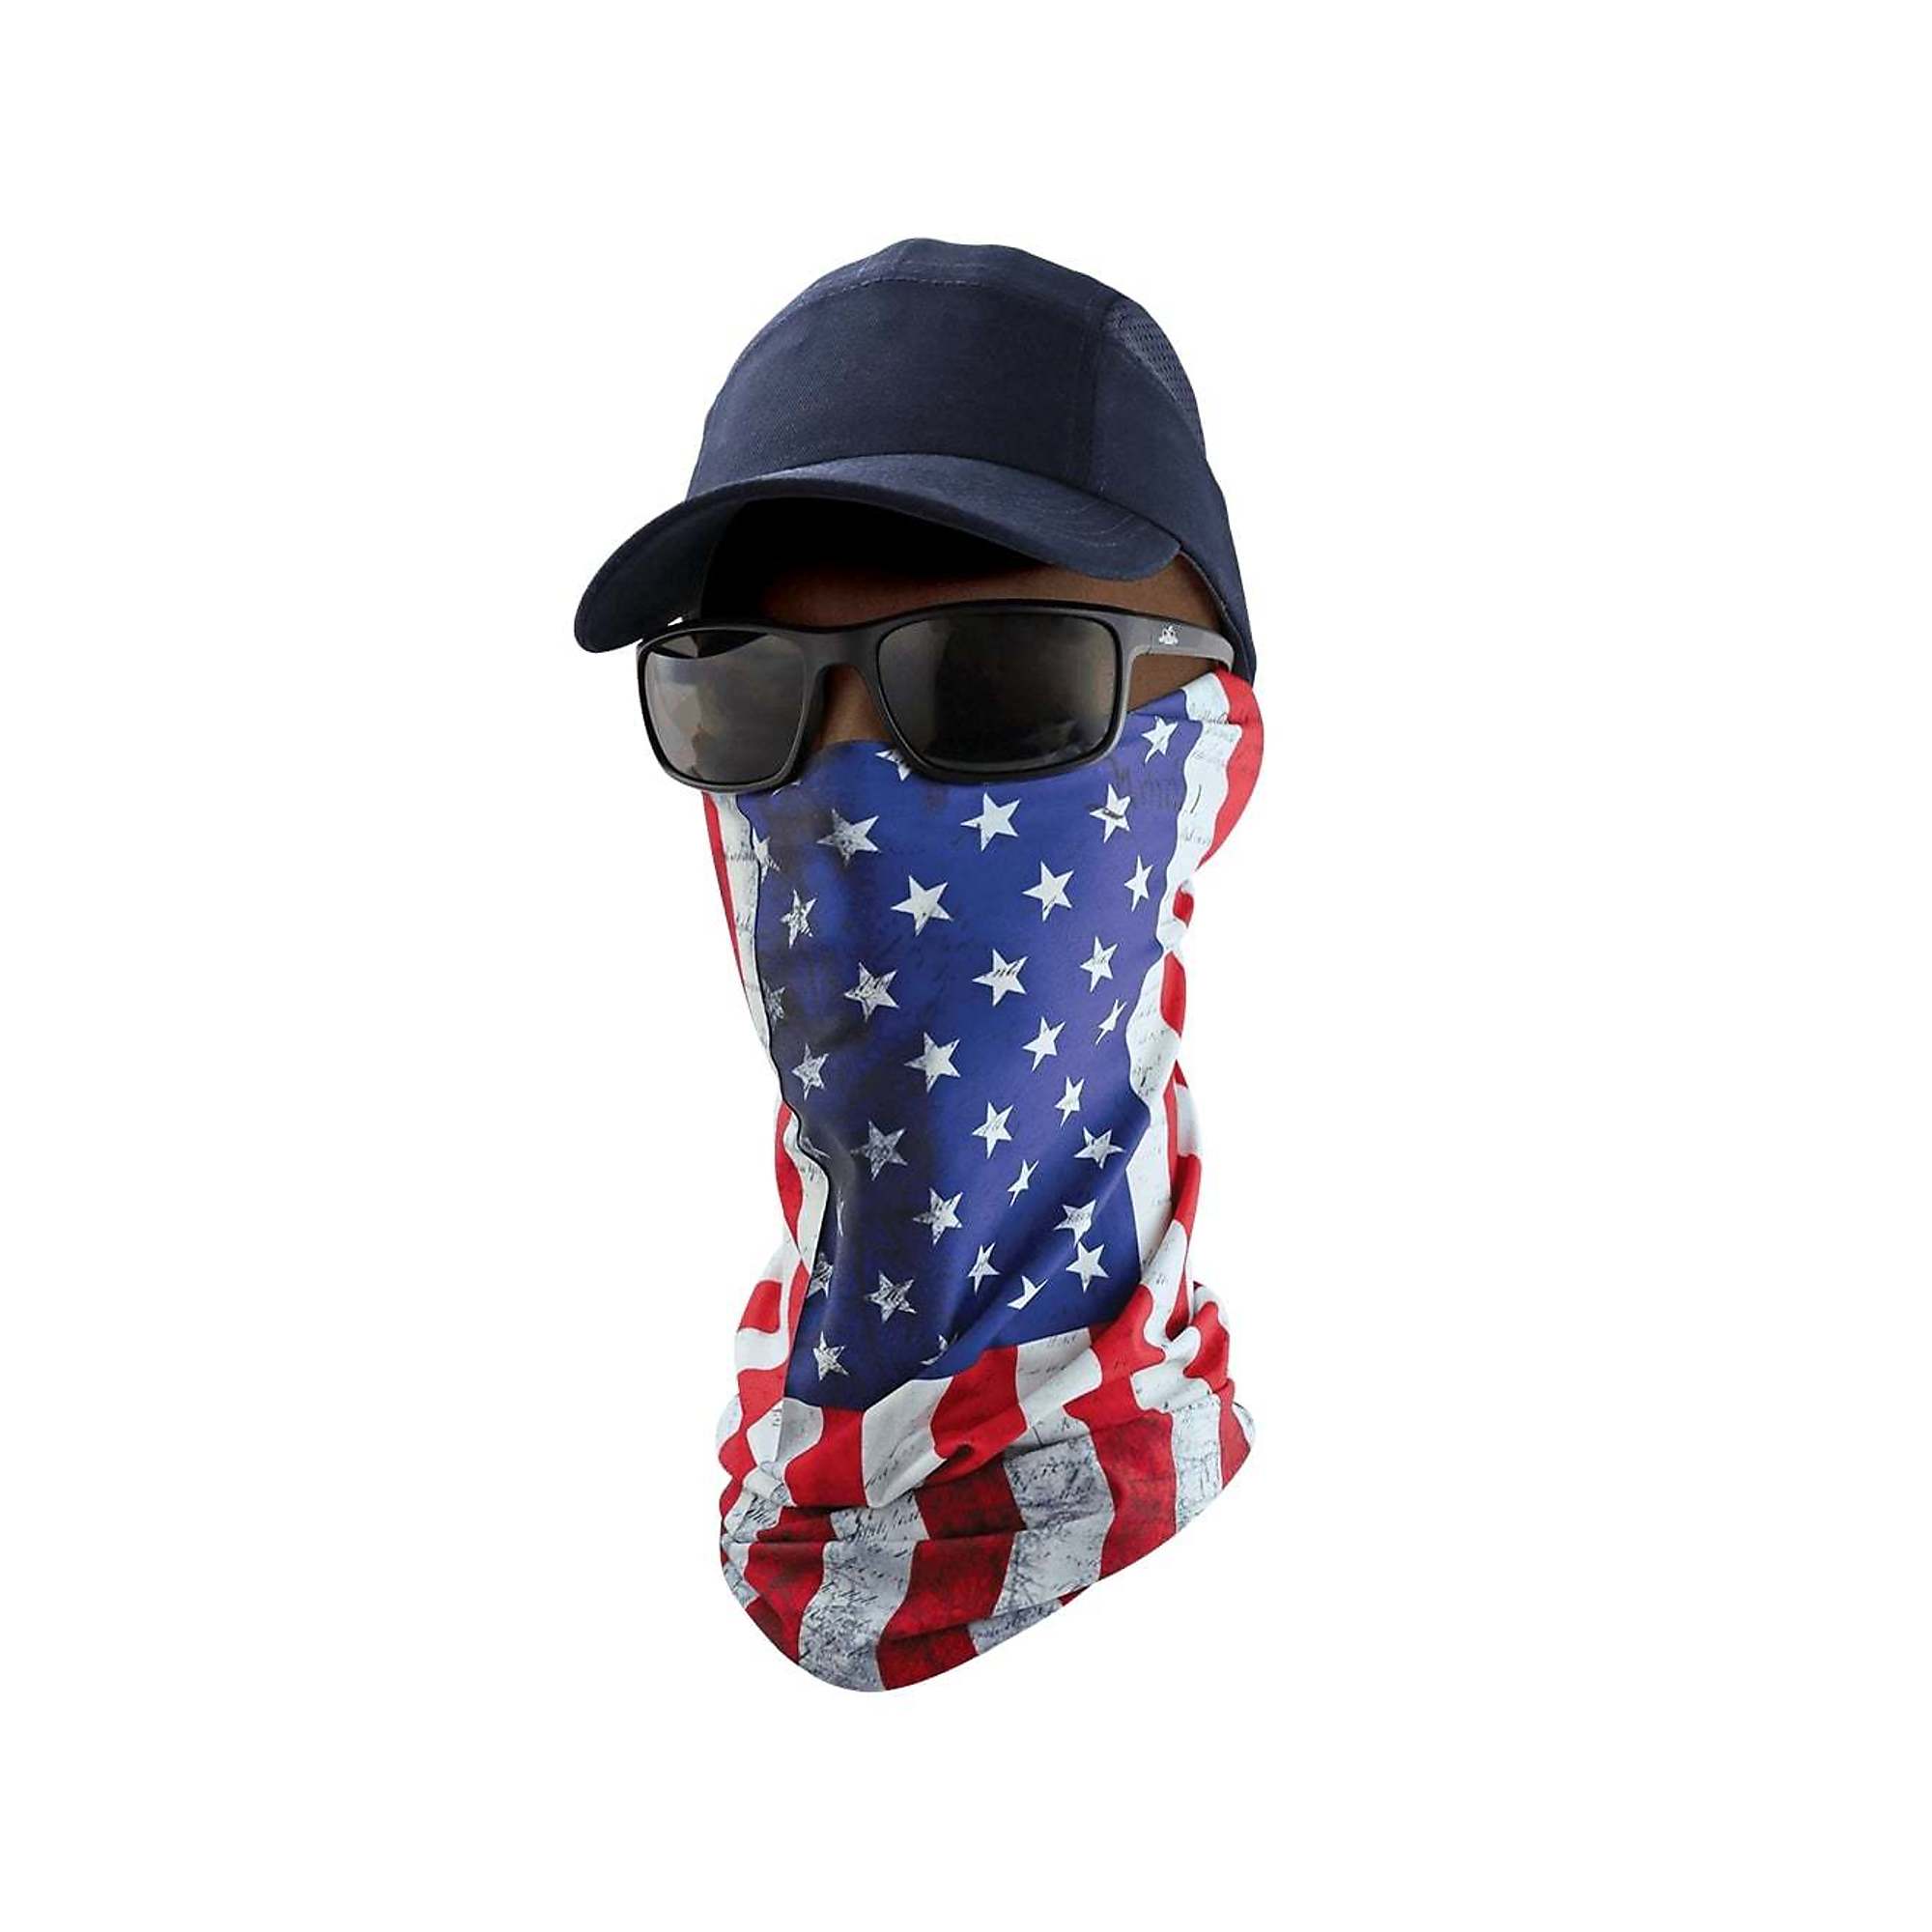 FrogWear, Cooling Neck Gaiter, U.S.A. Flag Design - 6 Pack, Size One Size, Material Polyester Spandex, Model NG-401